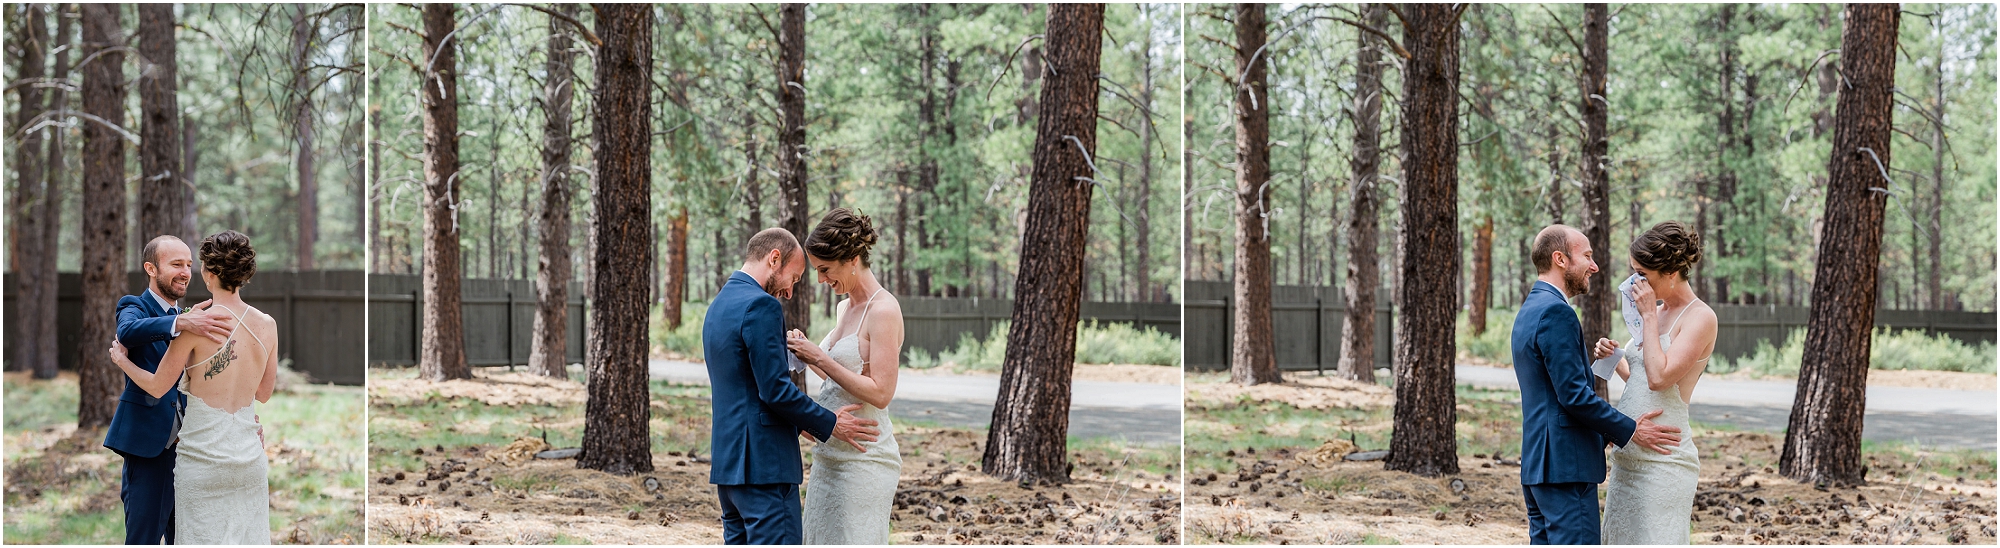 The moment you see your bride for the first look among the pines at the High Desert Museum in Bend, OR. | Erica Swantek Photography